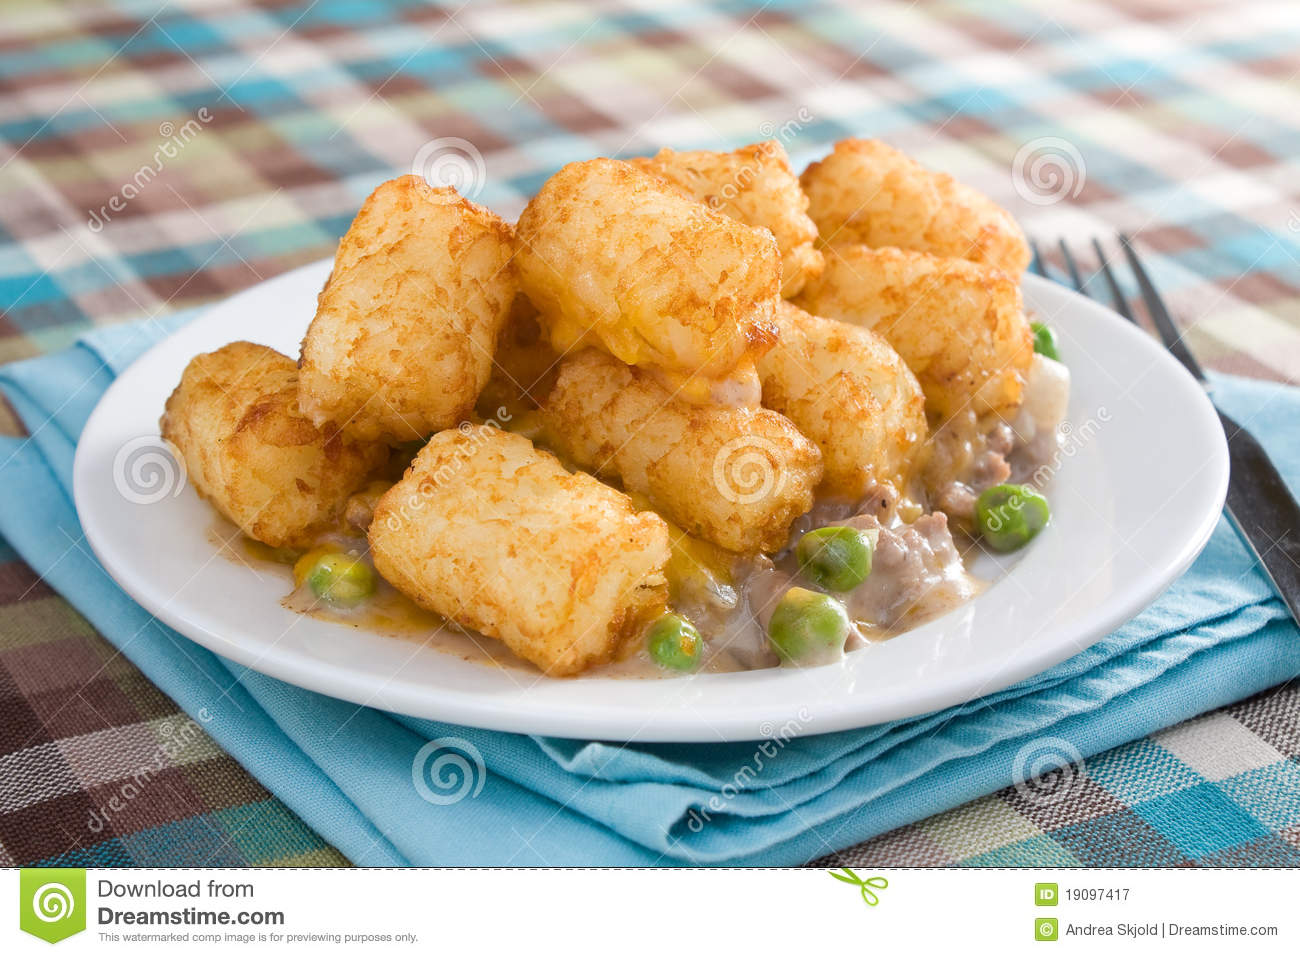 Tater Tot Casserole Plate Royalty Free Stock Photography   Image